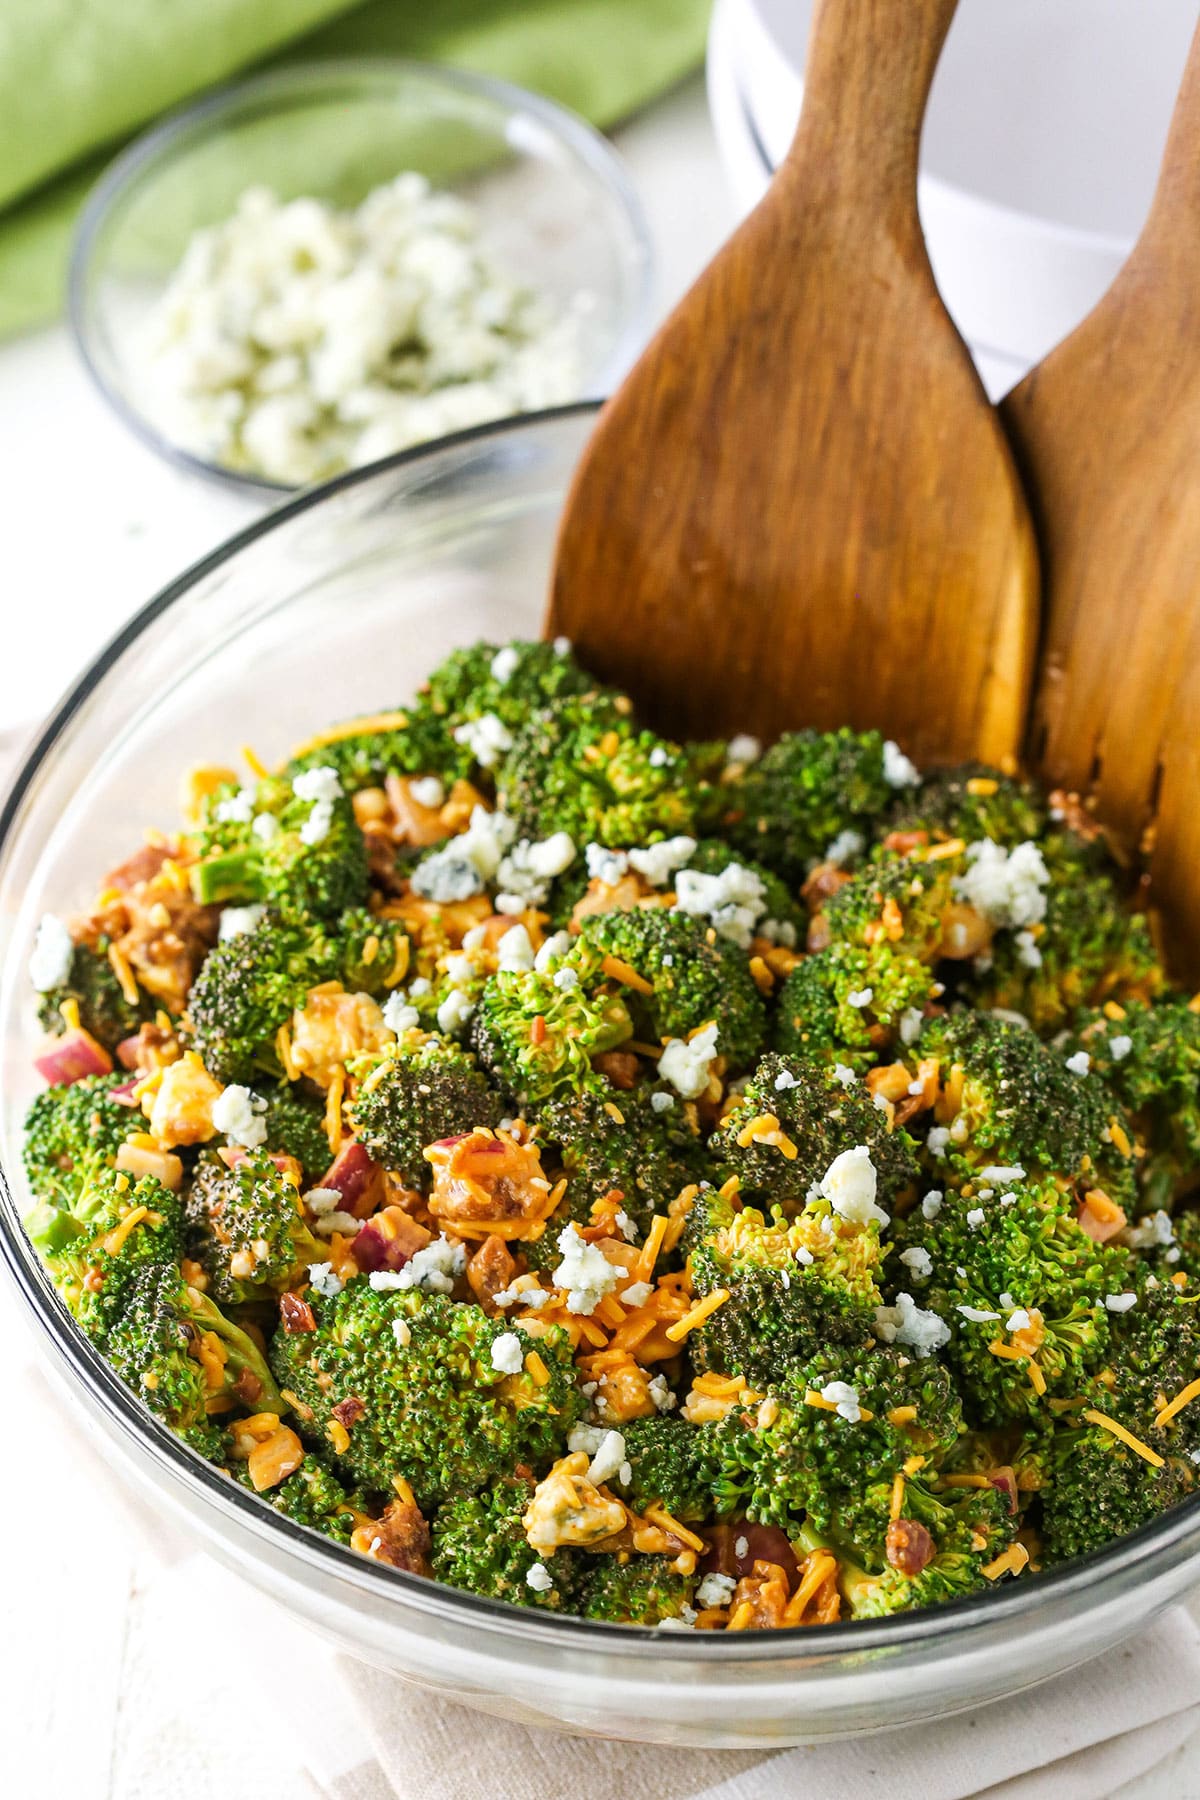 Buffalo Broccoli Salad with wooden serving spoons in a clear glass bowl